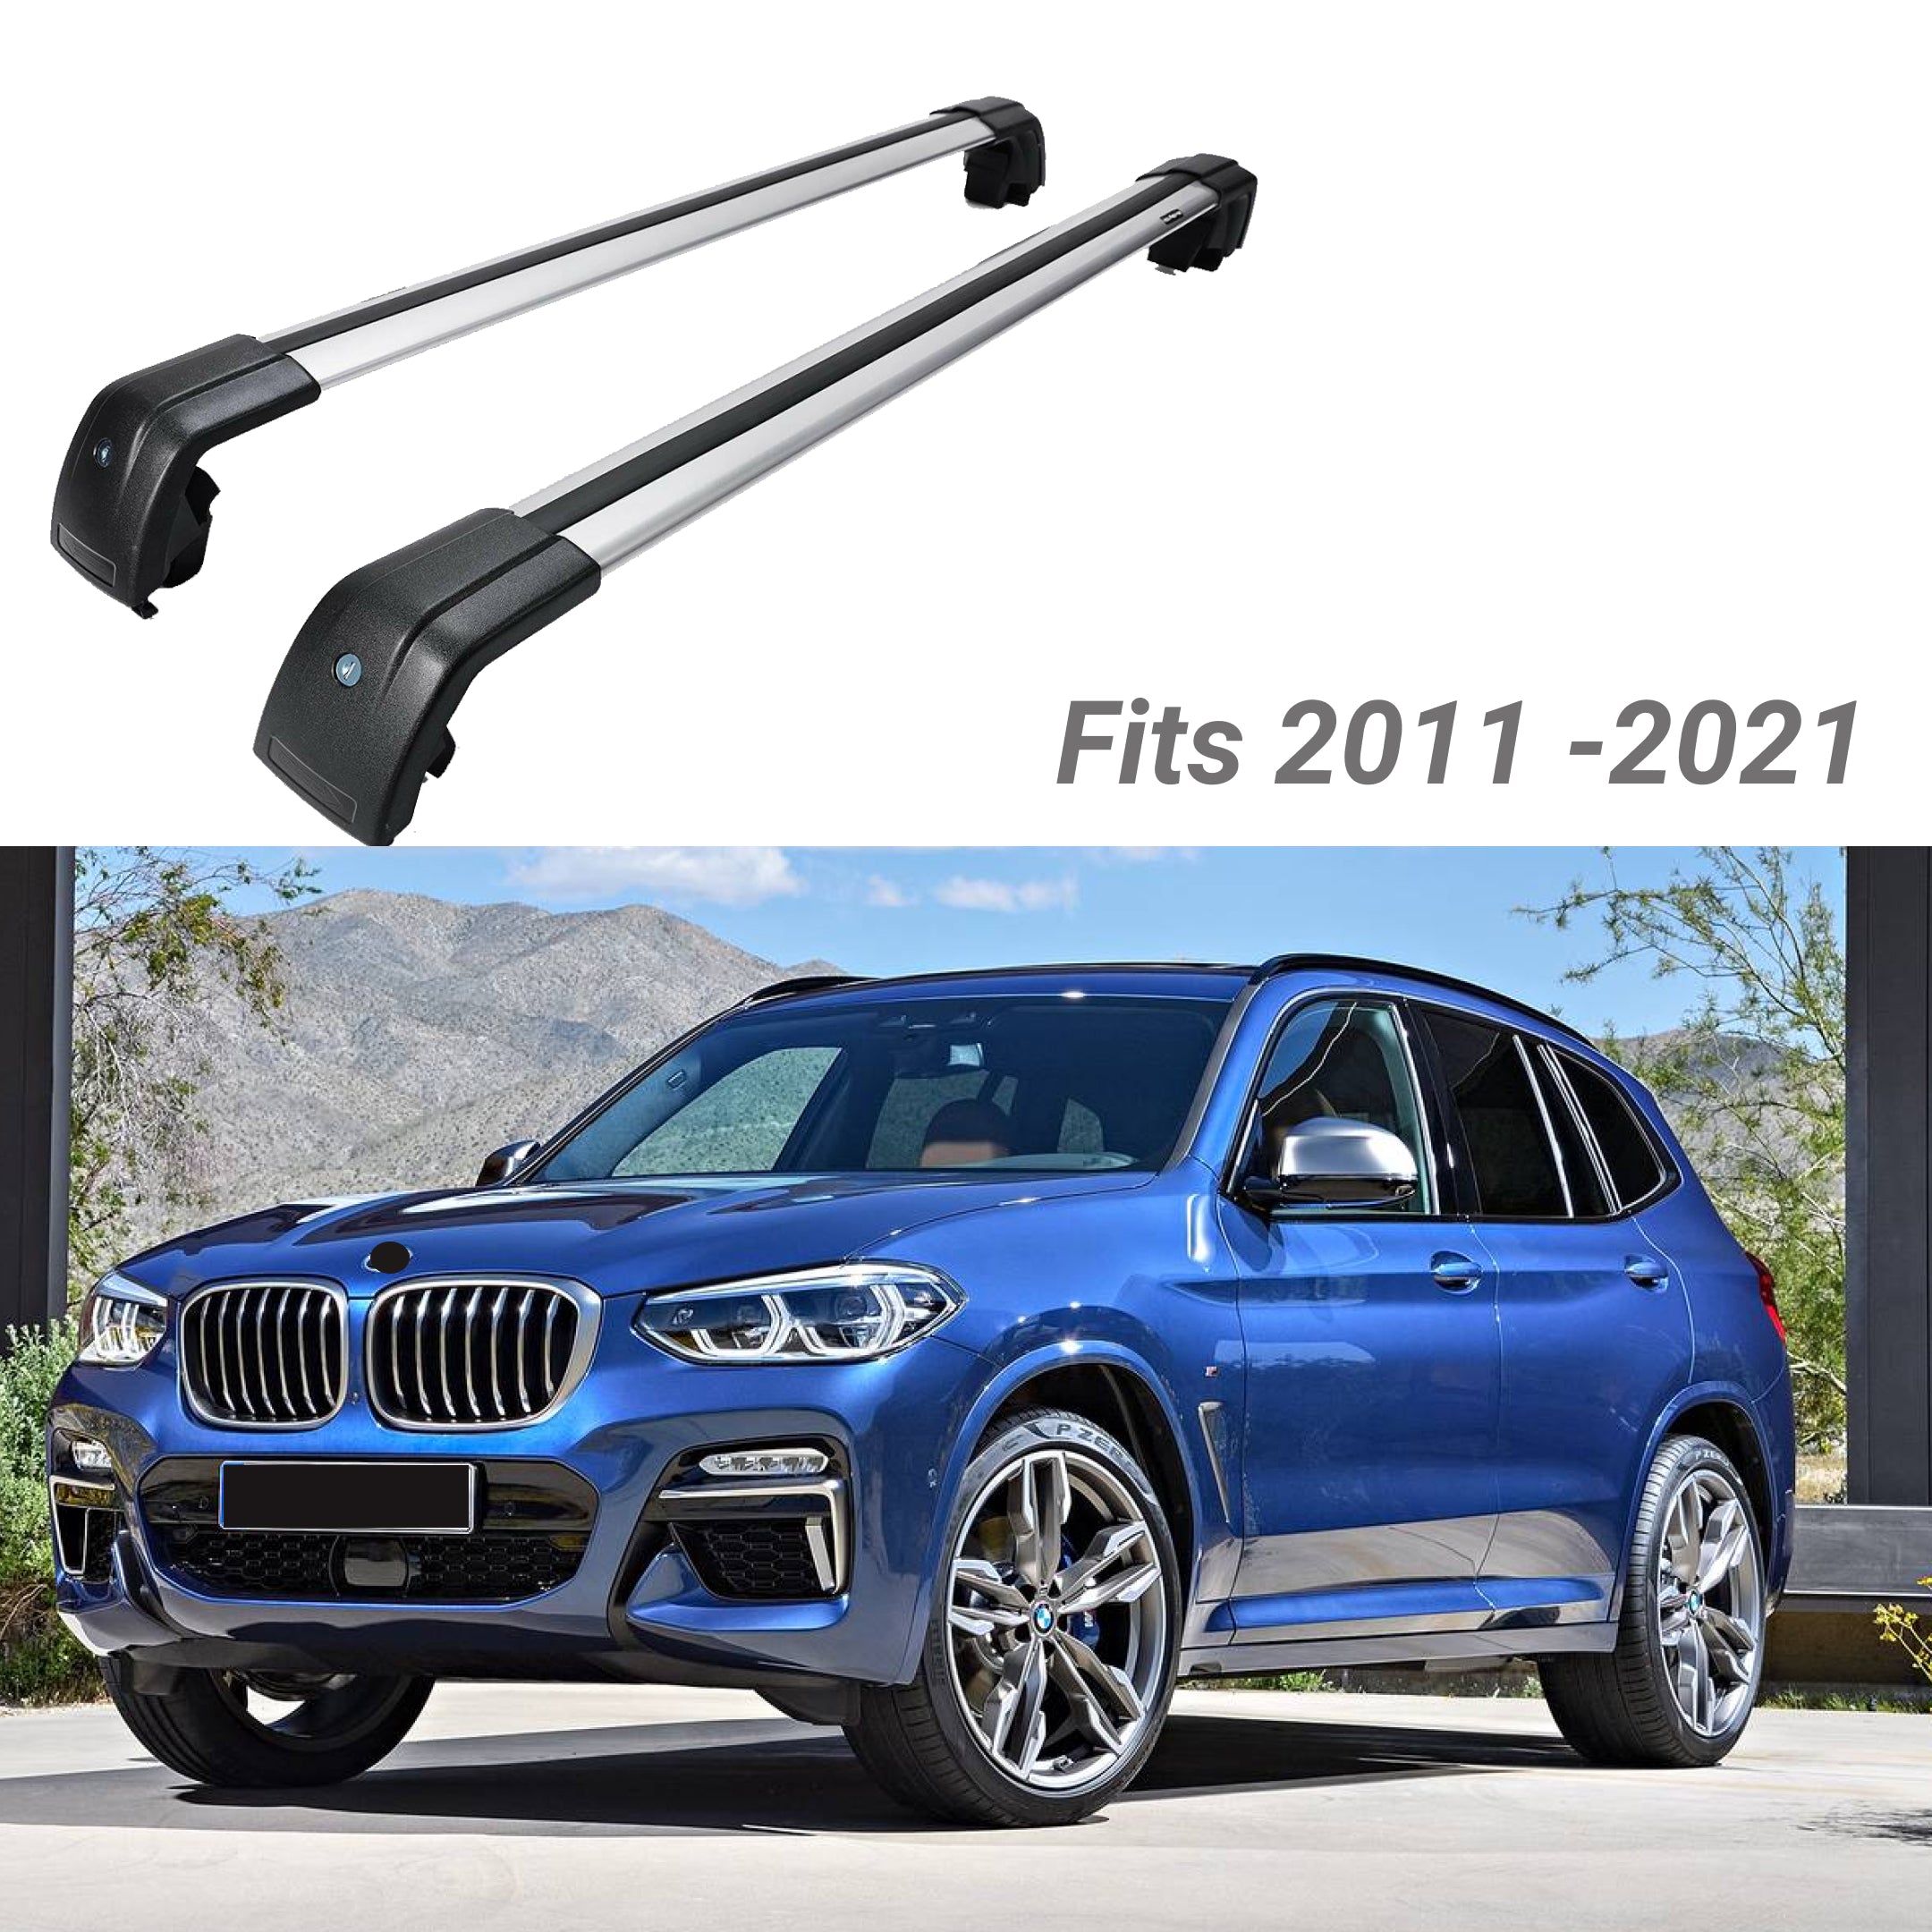 Fit 2011-2021 BMW X3 SUV Top Roof Rack Cross Bar Baggage Luggage Carrier Bar - 0